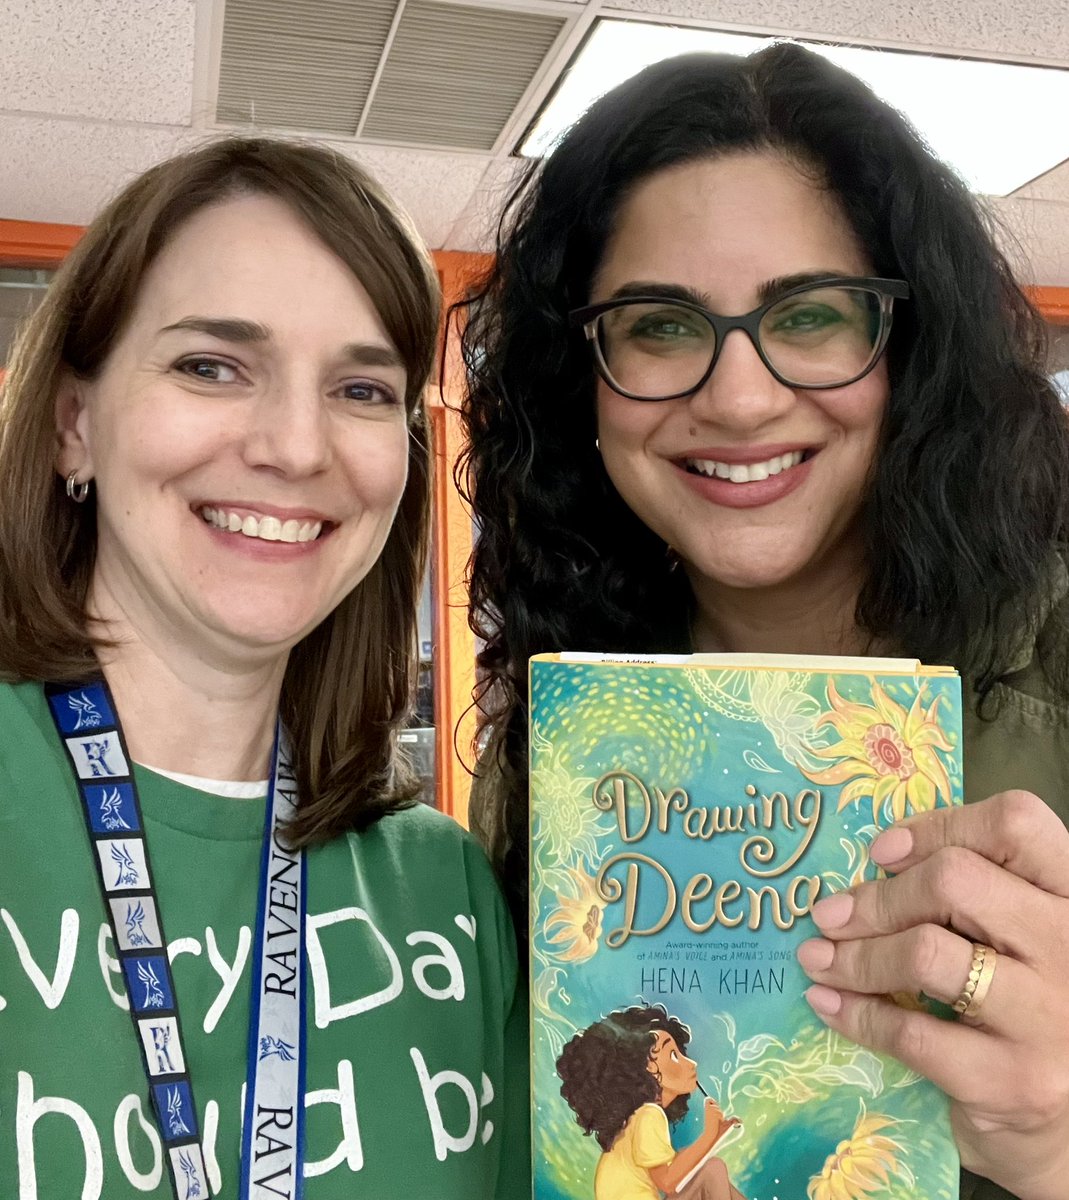 What a treat for @FairhillES ‘s upper grades today! We met author @henakhanbooks and learned what it takes to be a great writer. Thanks to @KidsandProse for sponsoring the visit. It was lovely to see how many students connected to Deena’s story!